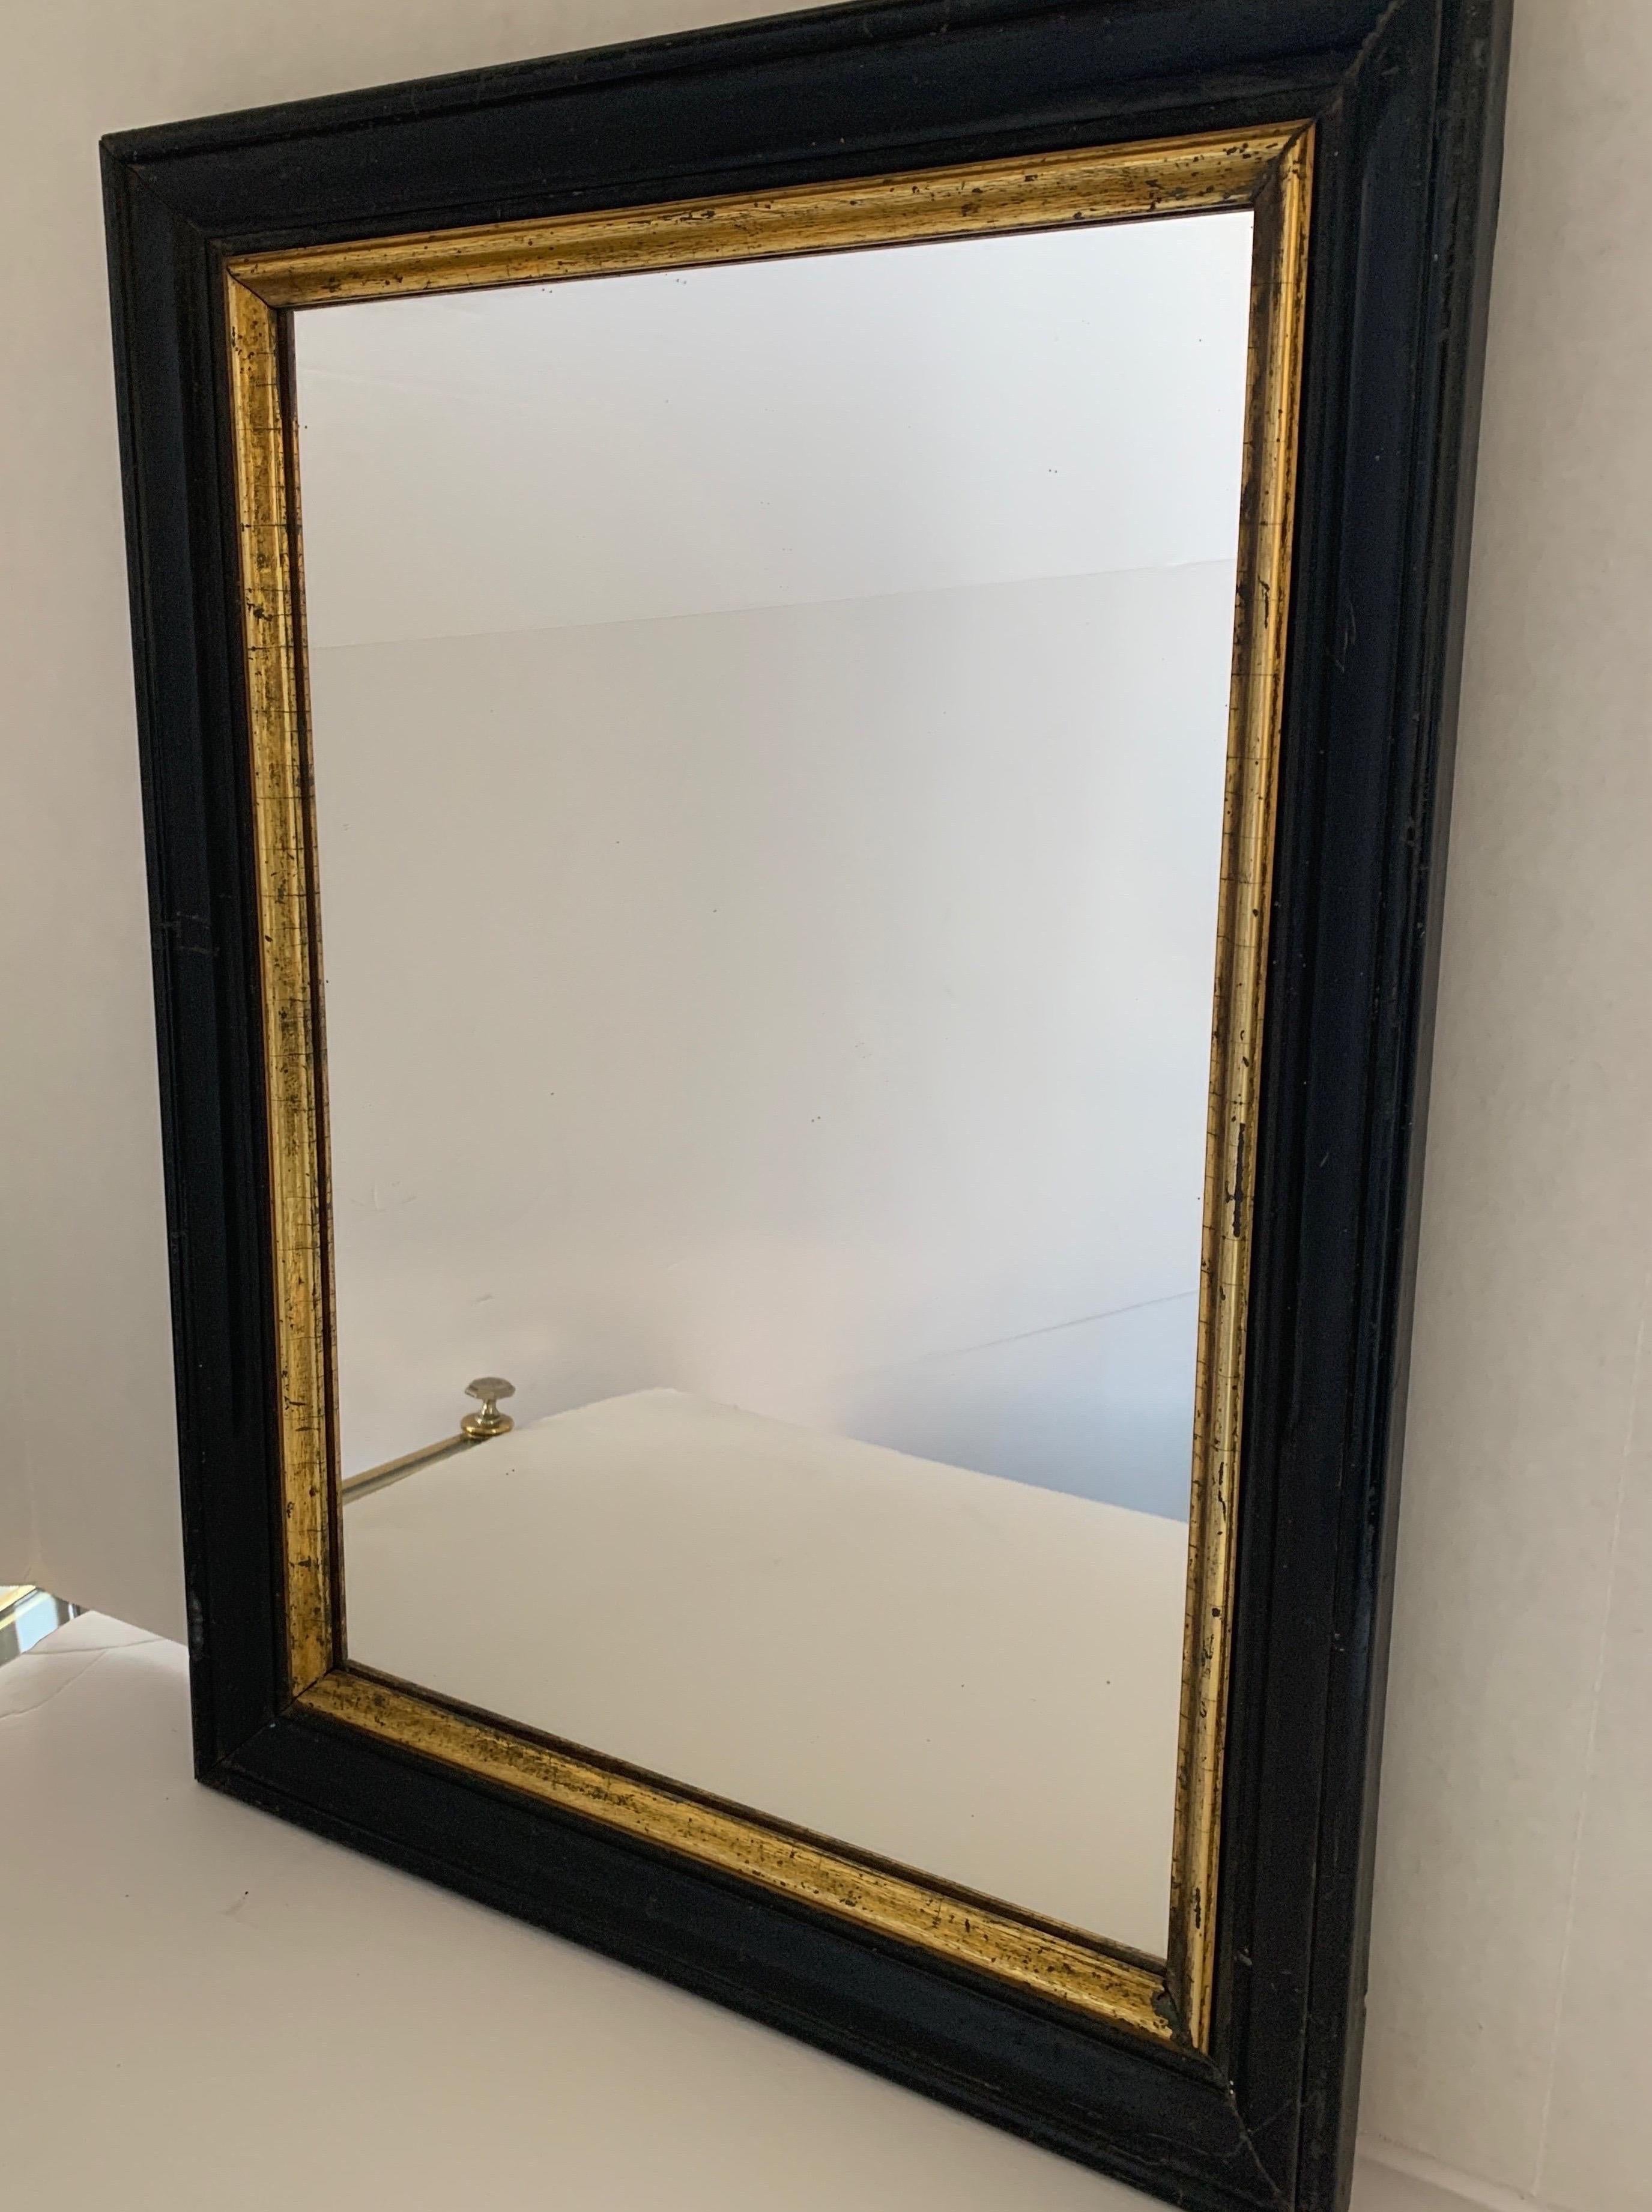 Wood Early 1900s Black Spanish Frame with Gold Trim Mirror